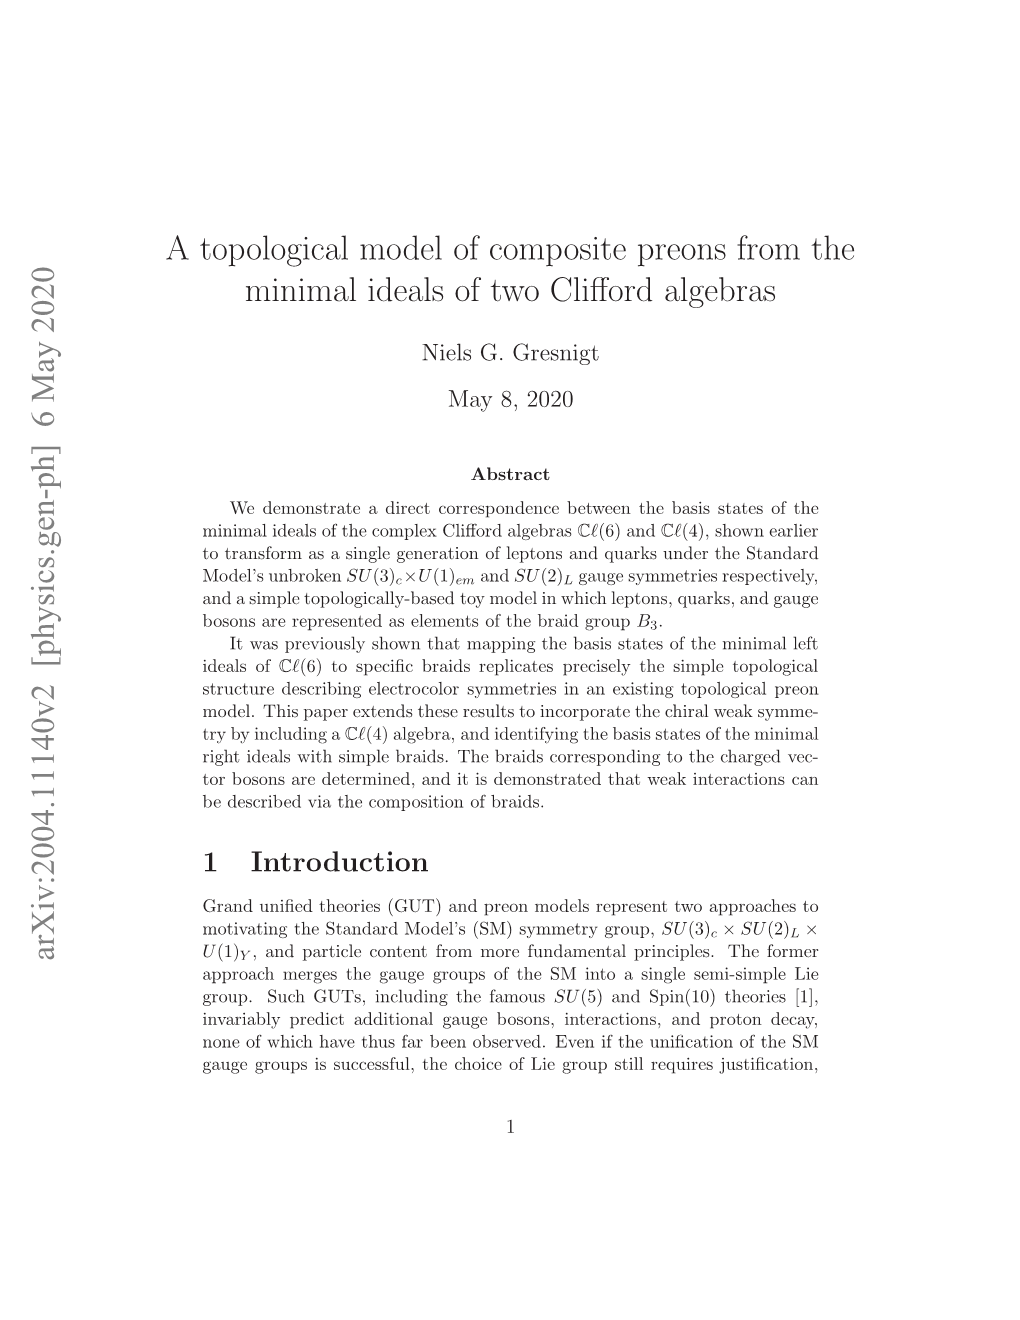 A Topological Model of Composite Preons from the Minimal Ideals Of